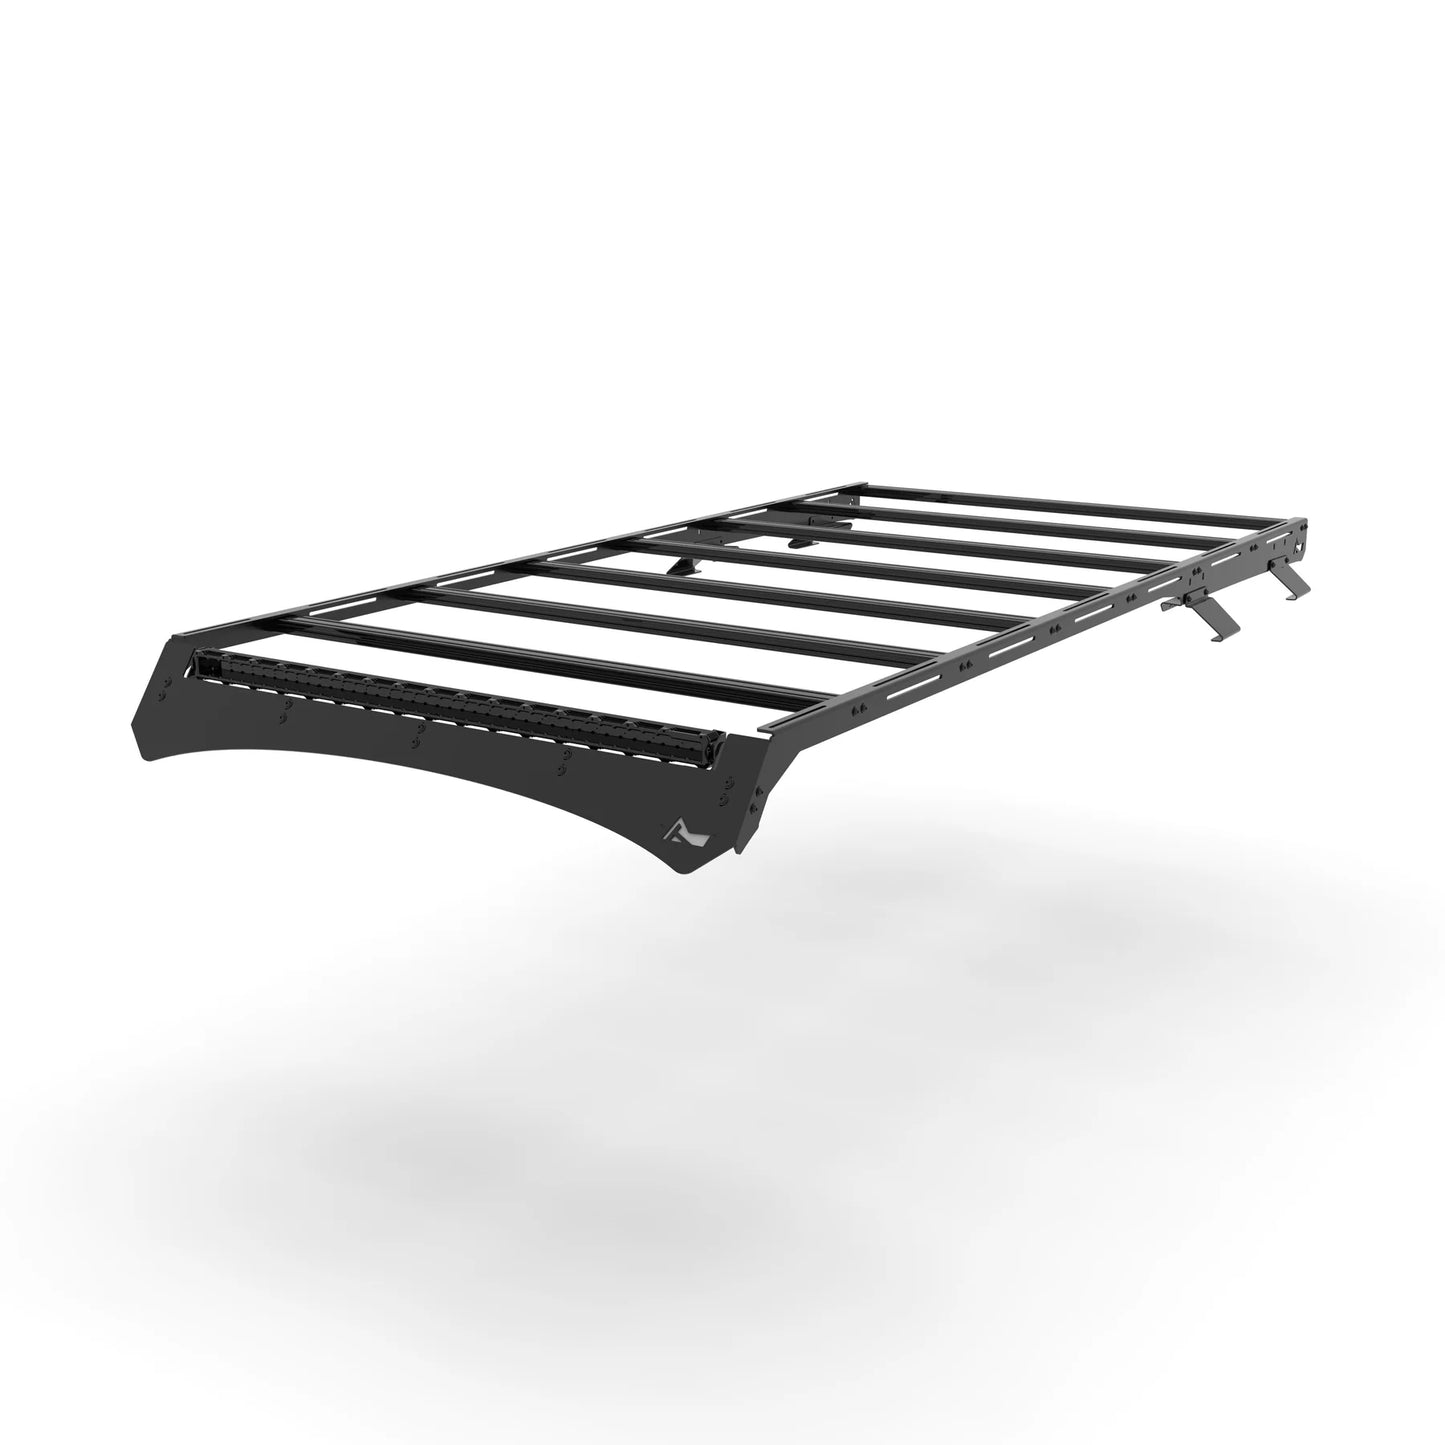 Modular Roof Rack for the Ford Bronco 4 Door - by TrailRax